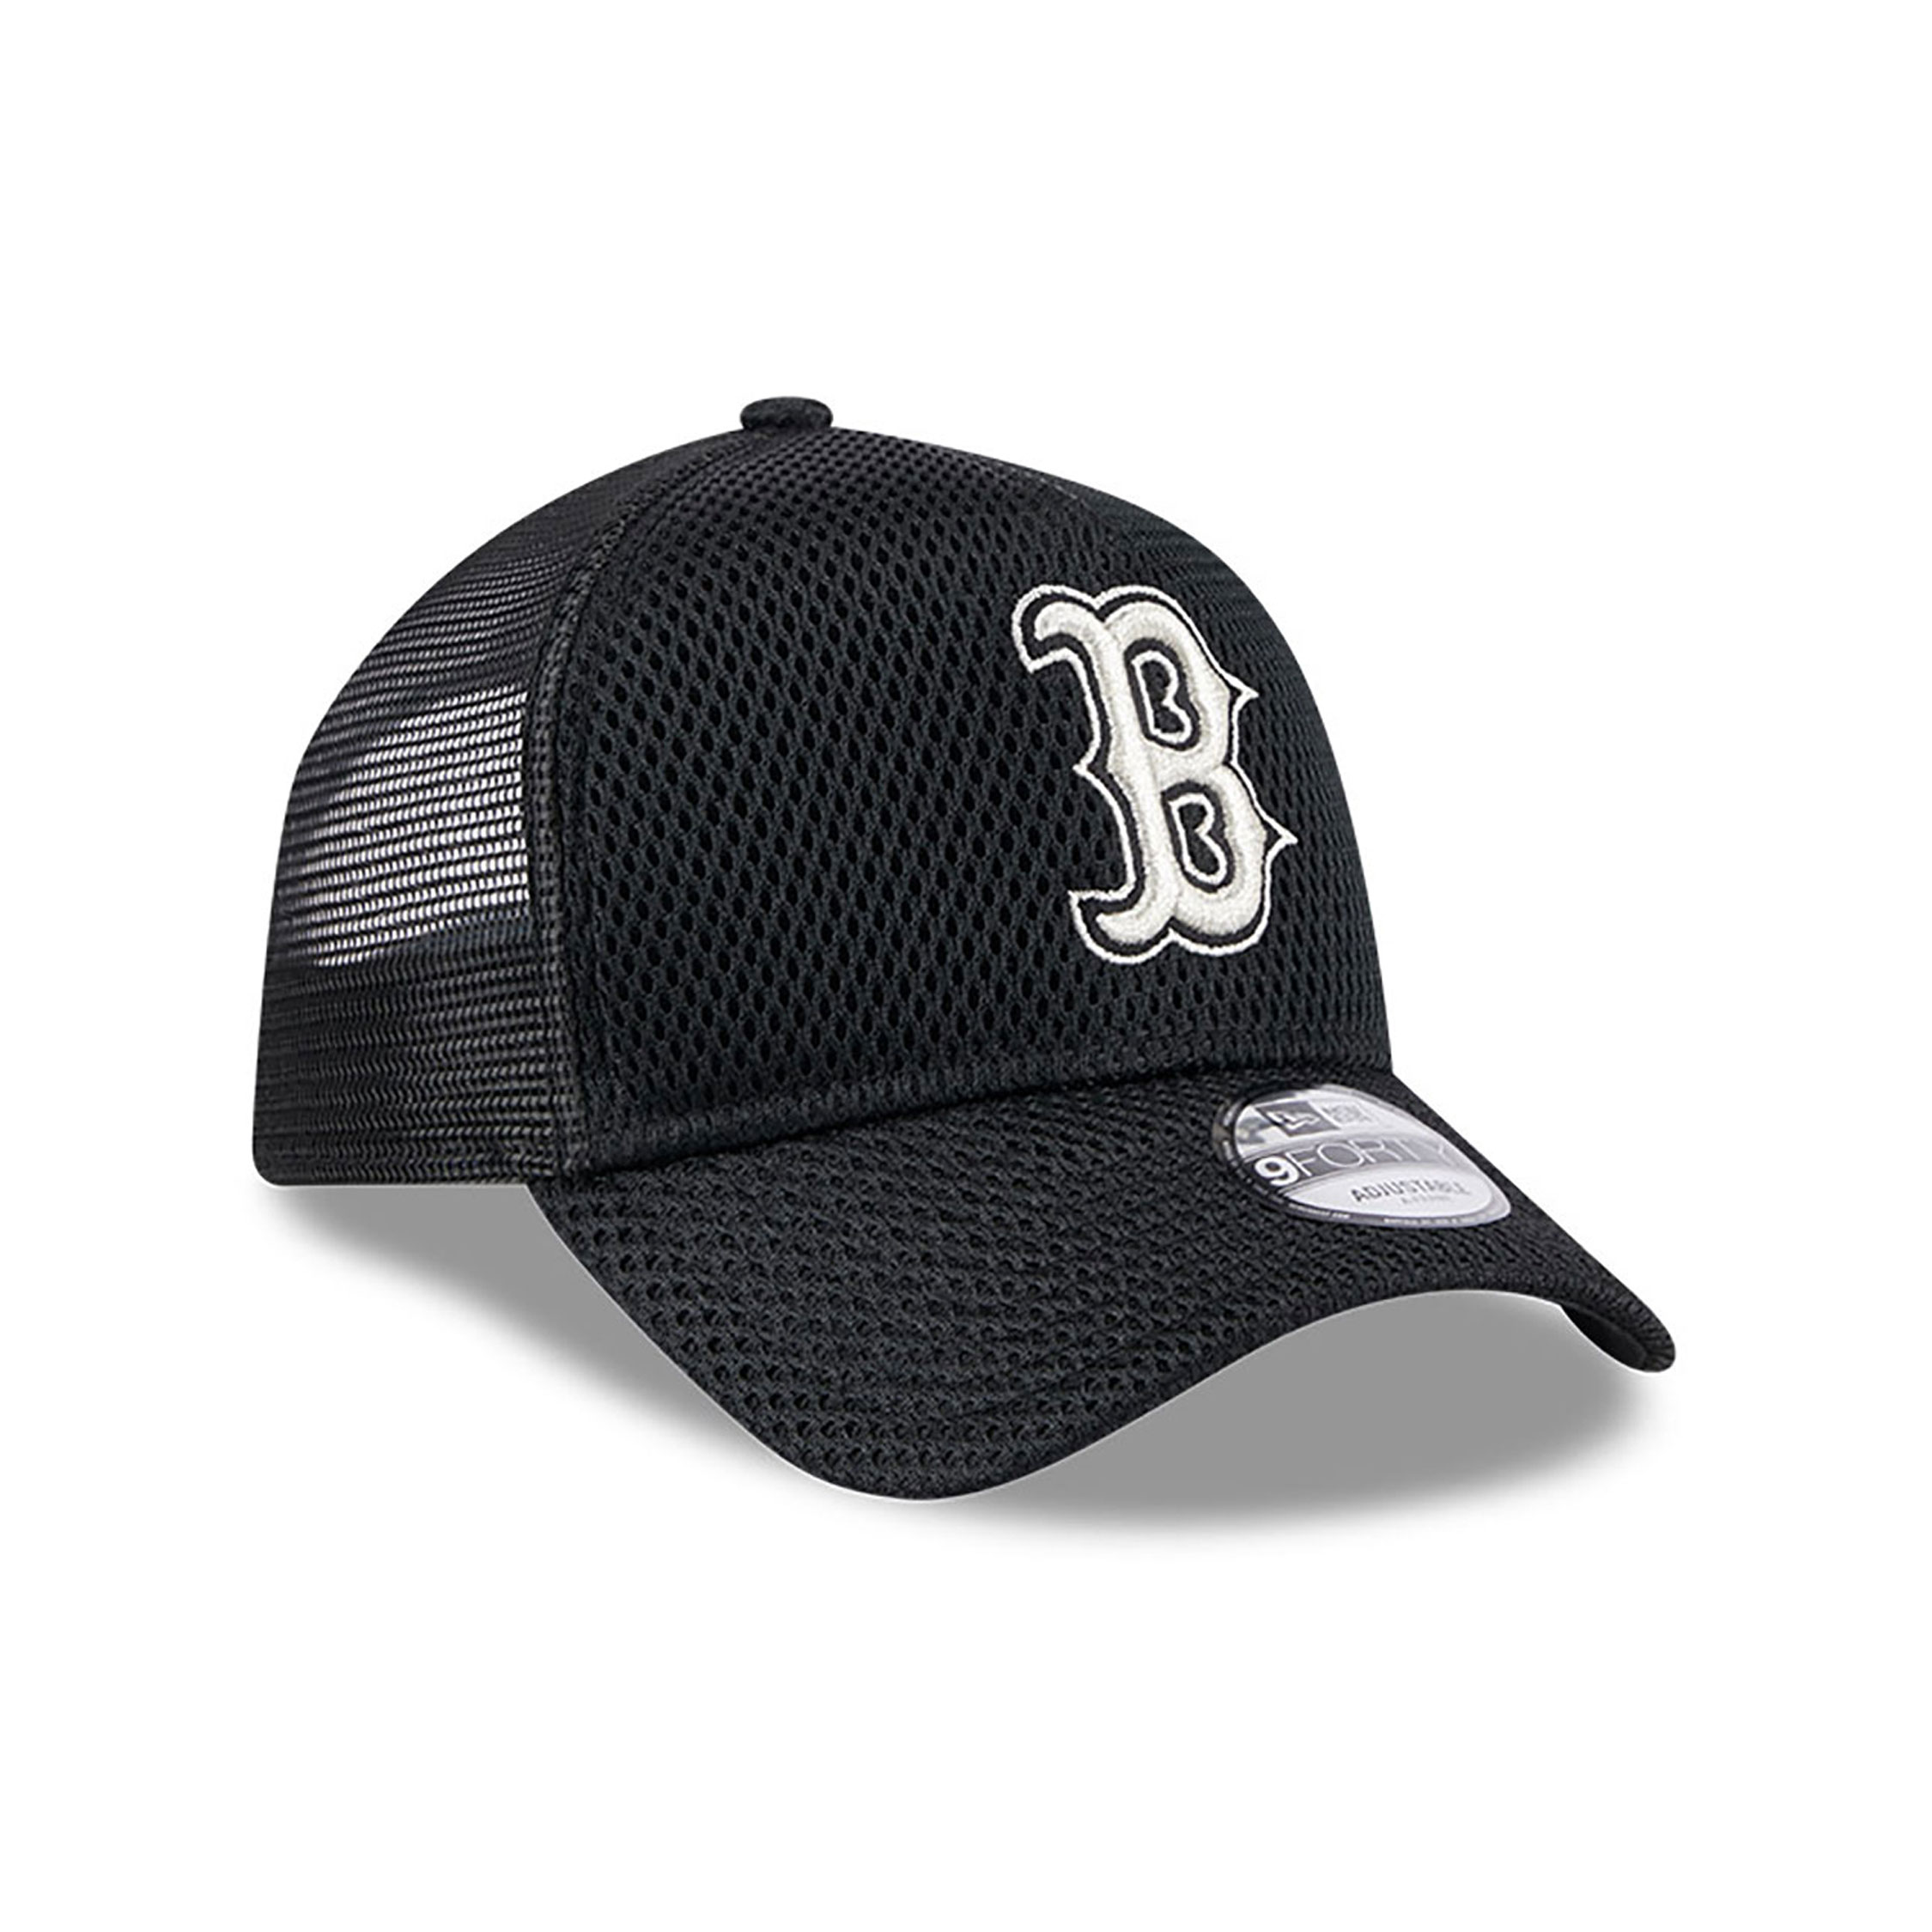 Boston Red Sox City Mesh Black 9FORTY A-Frame Adjustable Trucker Cap